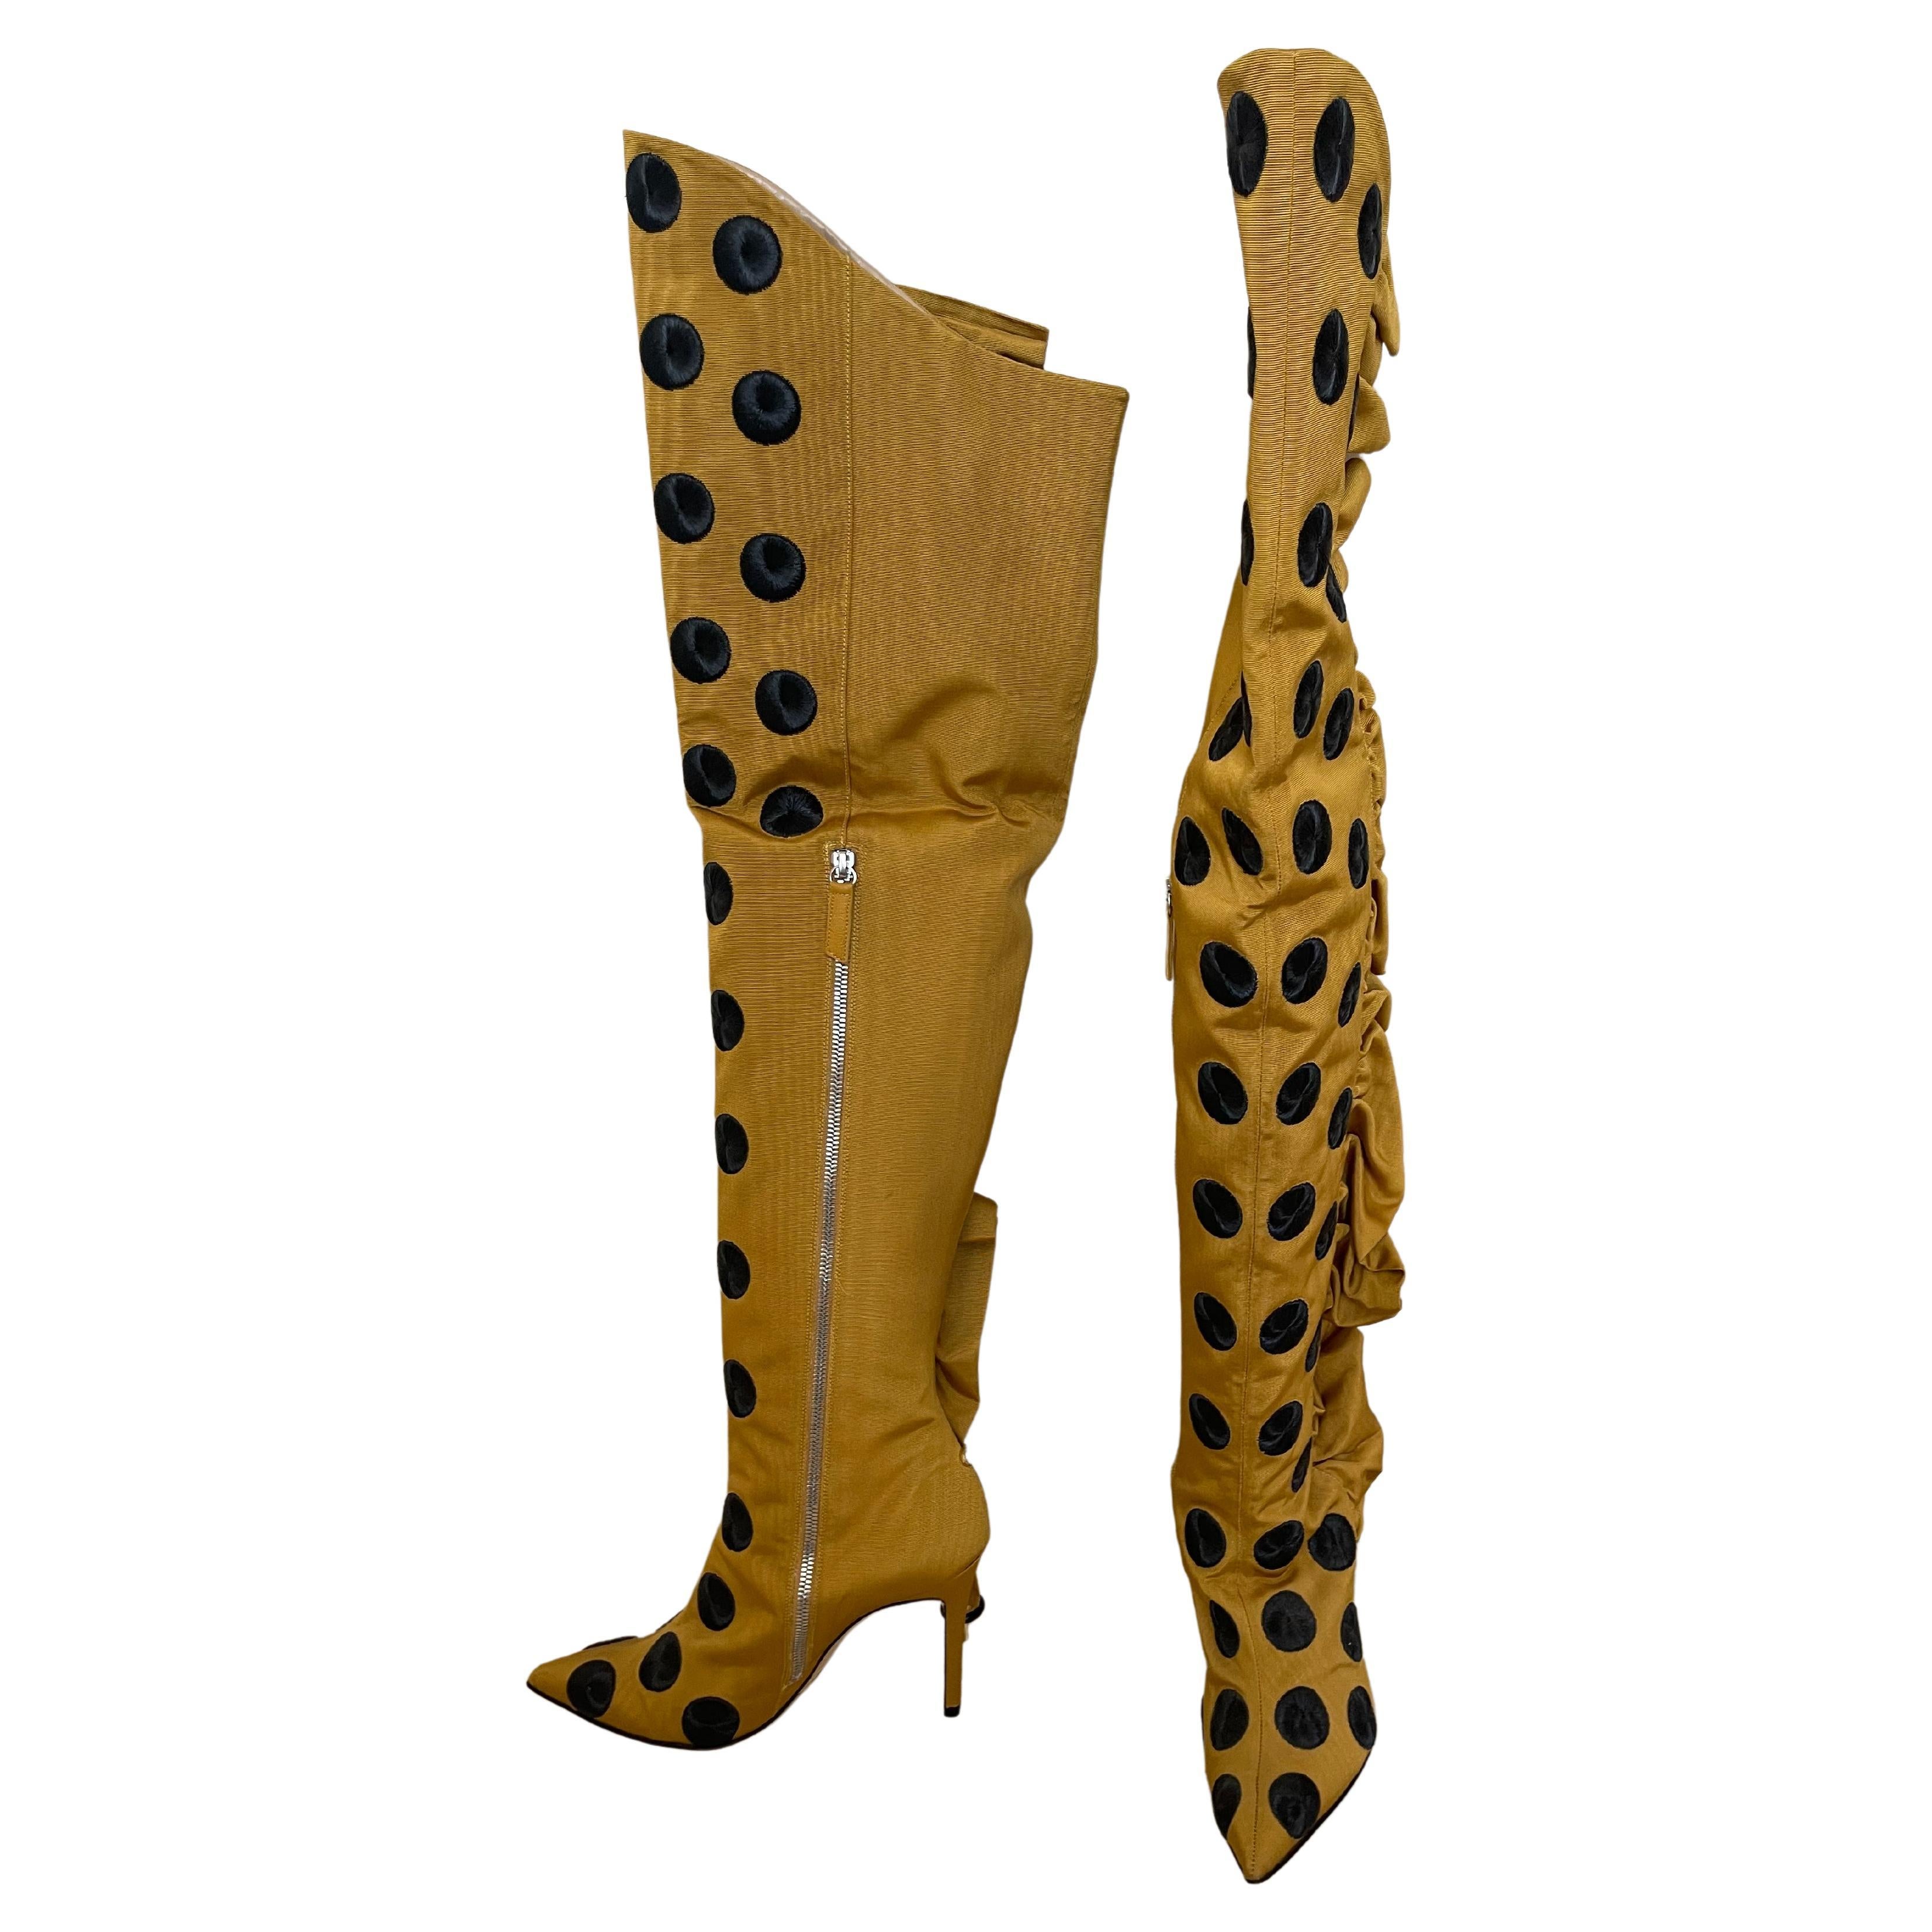 Angradema super high boots
Super high yellow boots with black polka dots, thin heel, pointed finish and a vertical ruffle that runs along the entire shaft

As a starting point, Angradema López explains that in addition to women and femininity ,